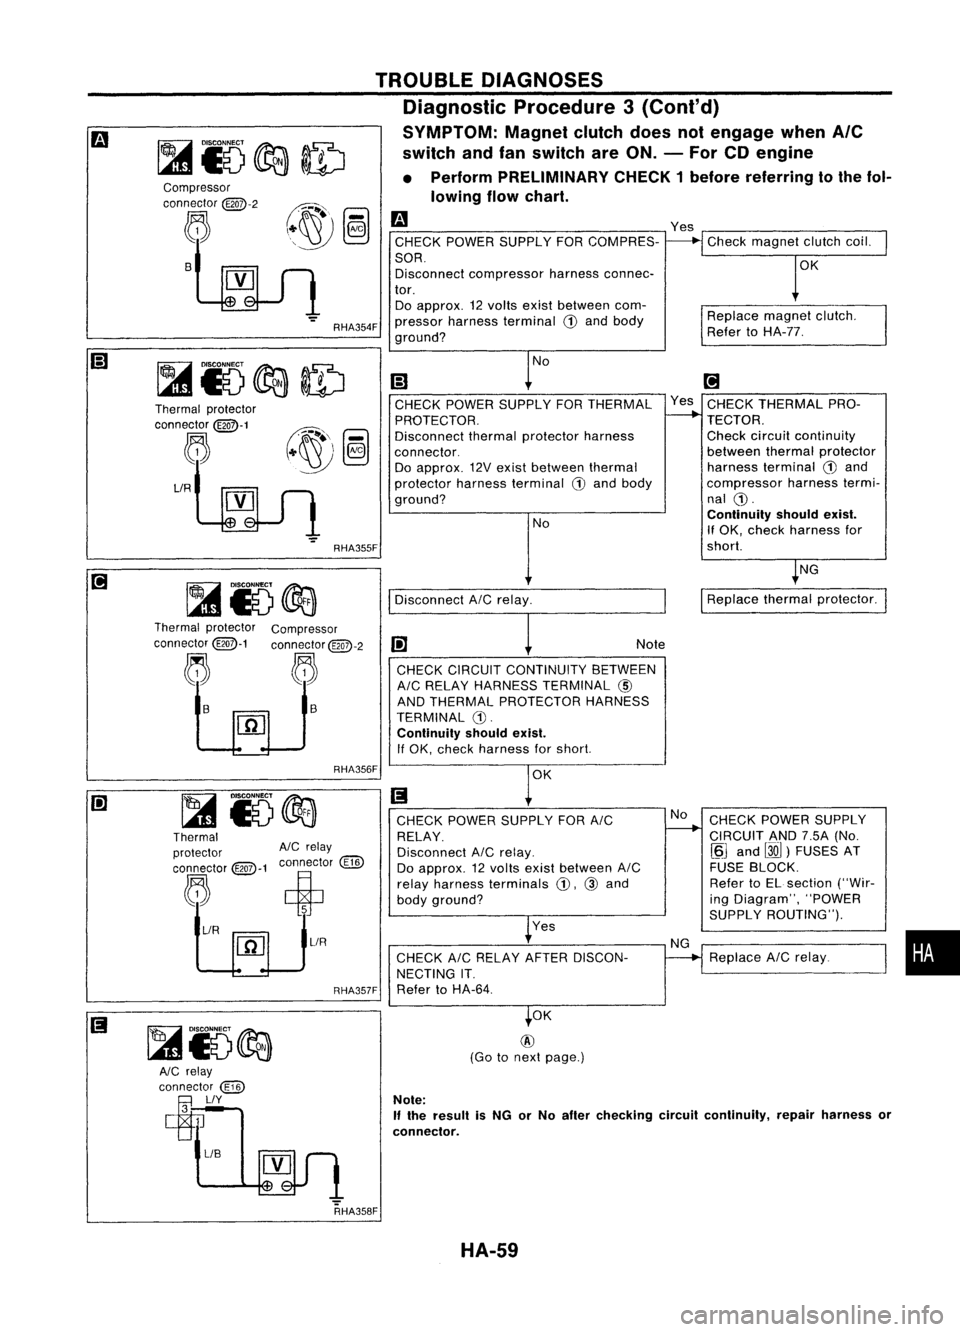 NISSAN ALMERA N15 1995  Service Manual TROUBLEDIAGNOSES
Diagnostic Procedure3(Cont'd)
SYMPTOM: Magnetclutchdoesnotengage whenAle
switch andfanswitch areON. -For CDengine
• Perform PRELIMINARY CHECK1before referring tothe fol-
lowing 